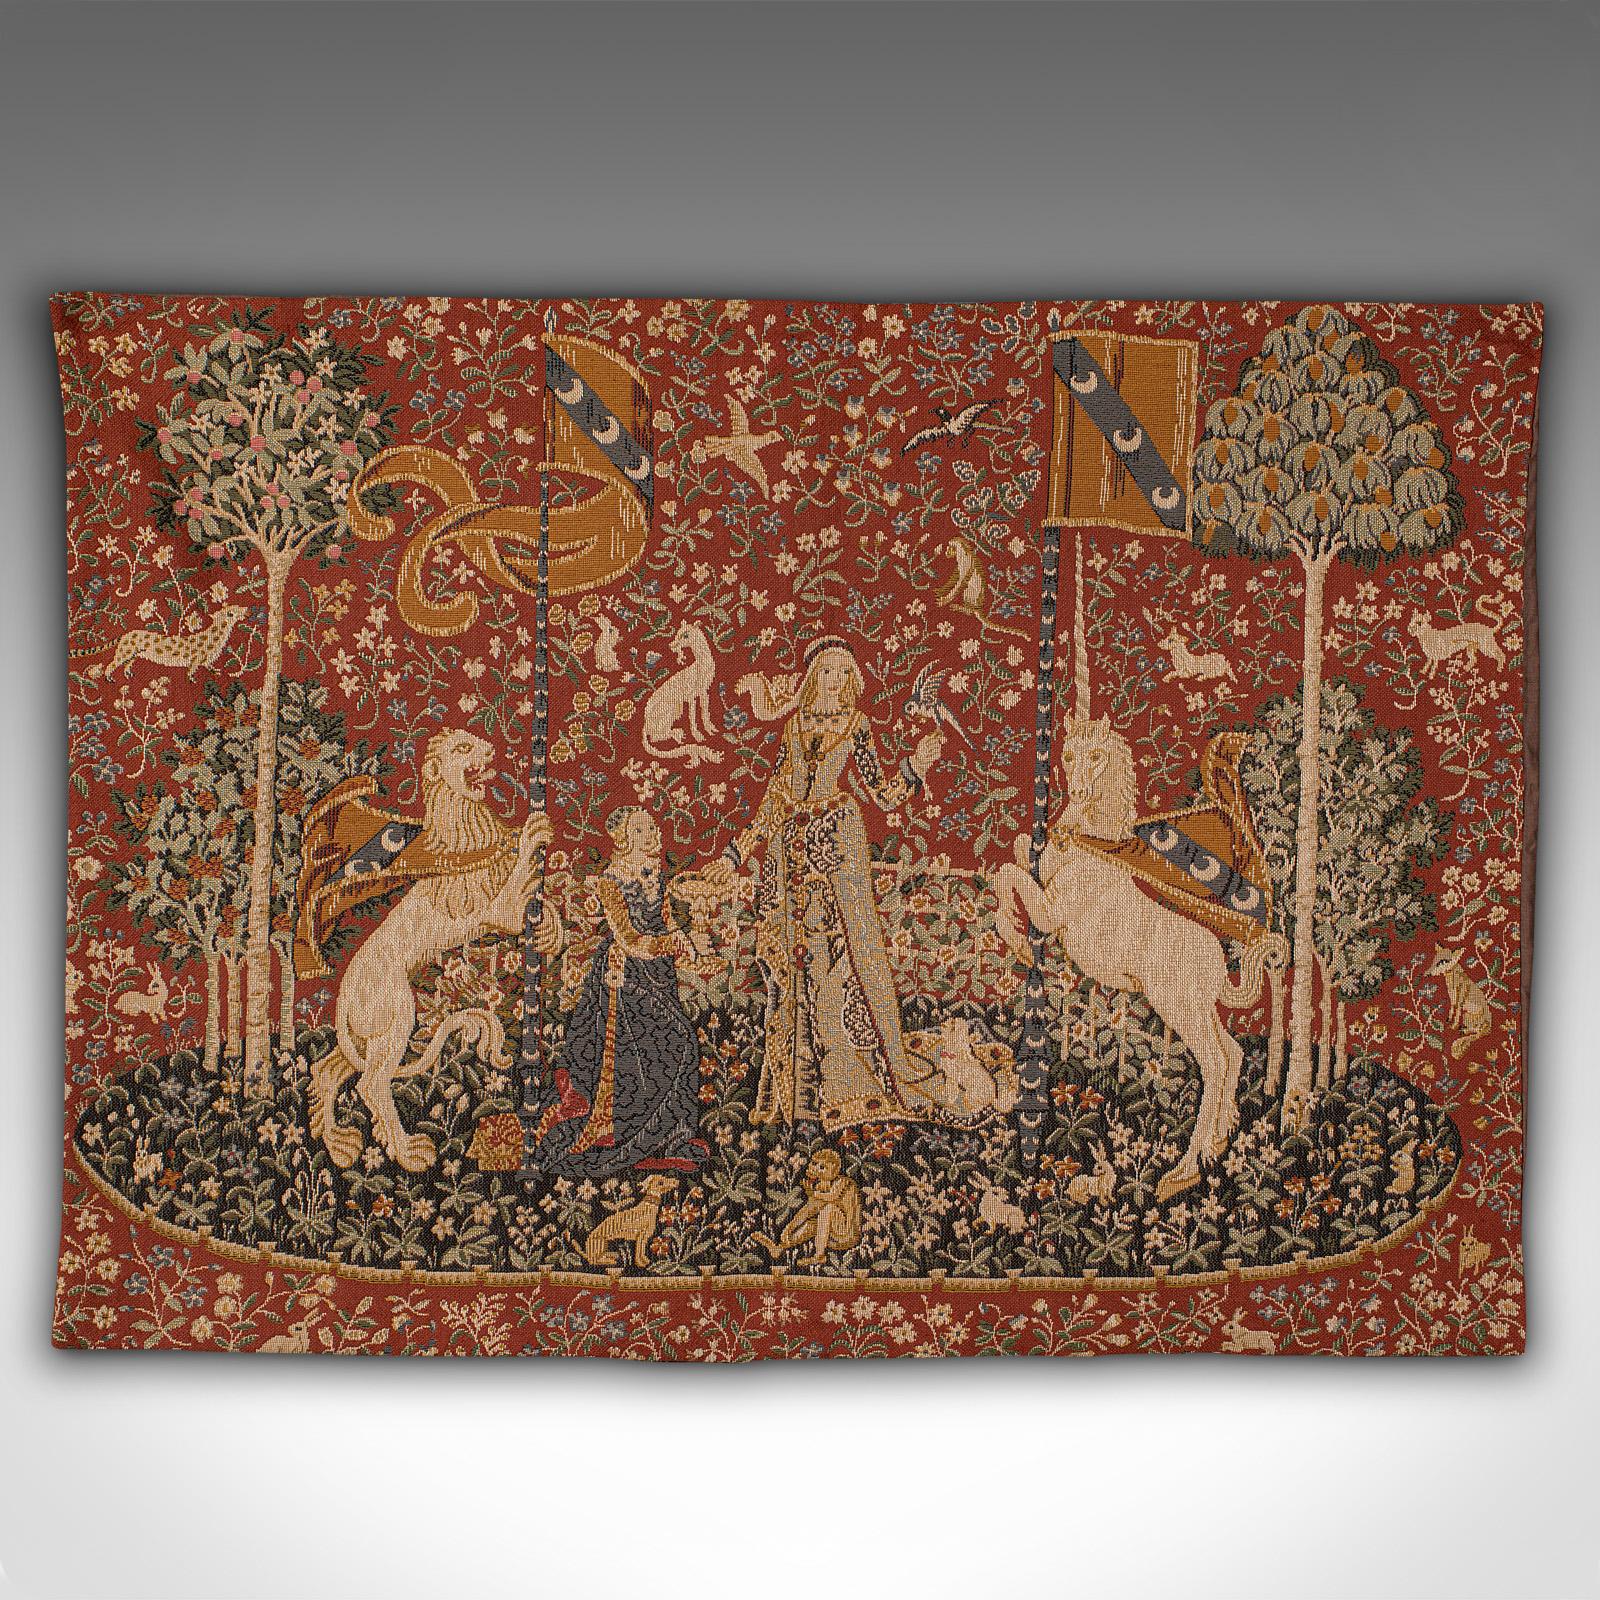 This is a vintage tapestry. A French, needlepoint scene depicting The Lady and the Unicorn, dating to the late 20th century, circa 1980.

This delightful tapestry is a quality recreation of the 15th century renaissance series of tapestries known